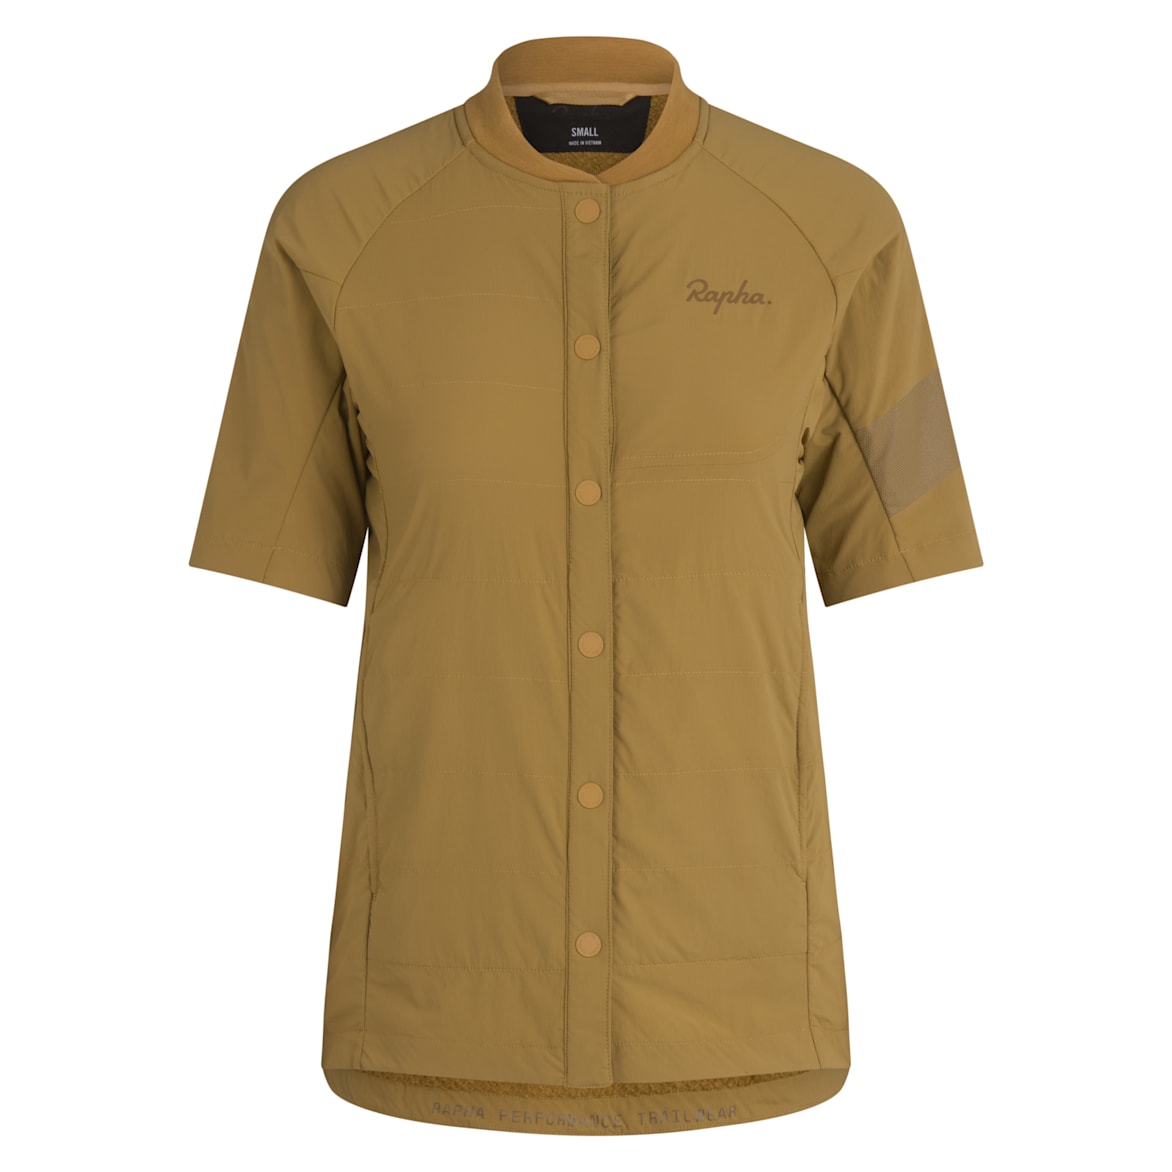 Women's Trail Insulated Short Sleeve Jacket